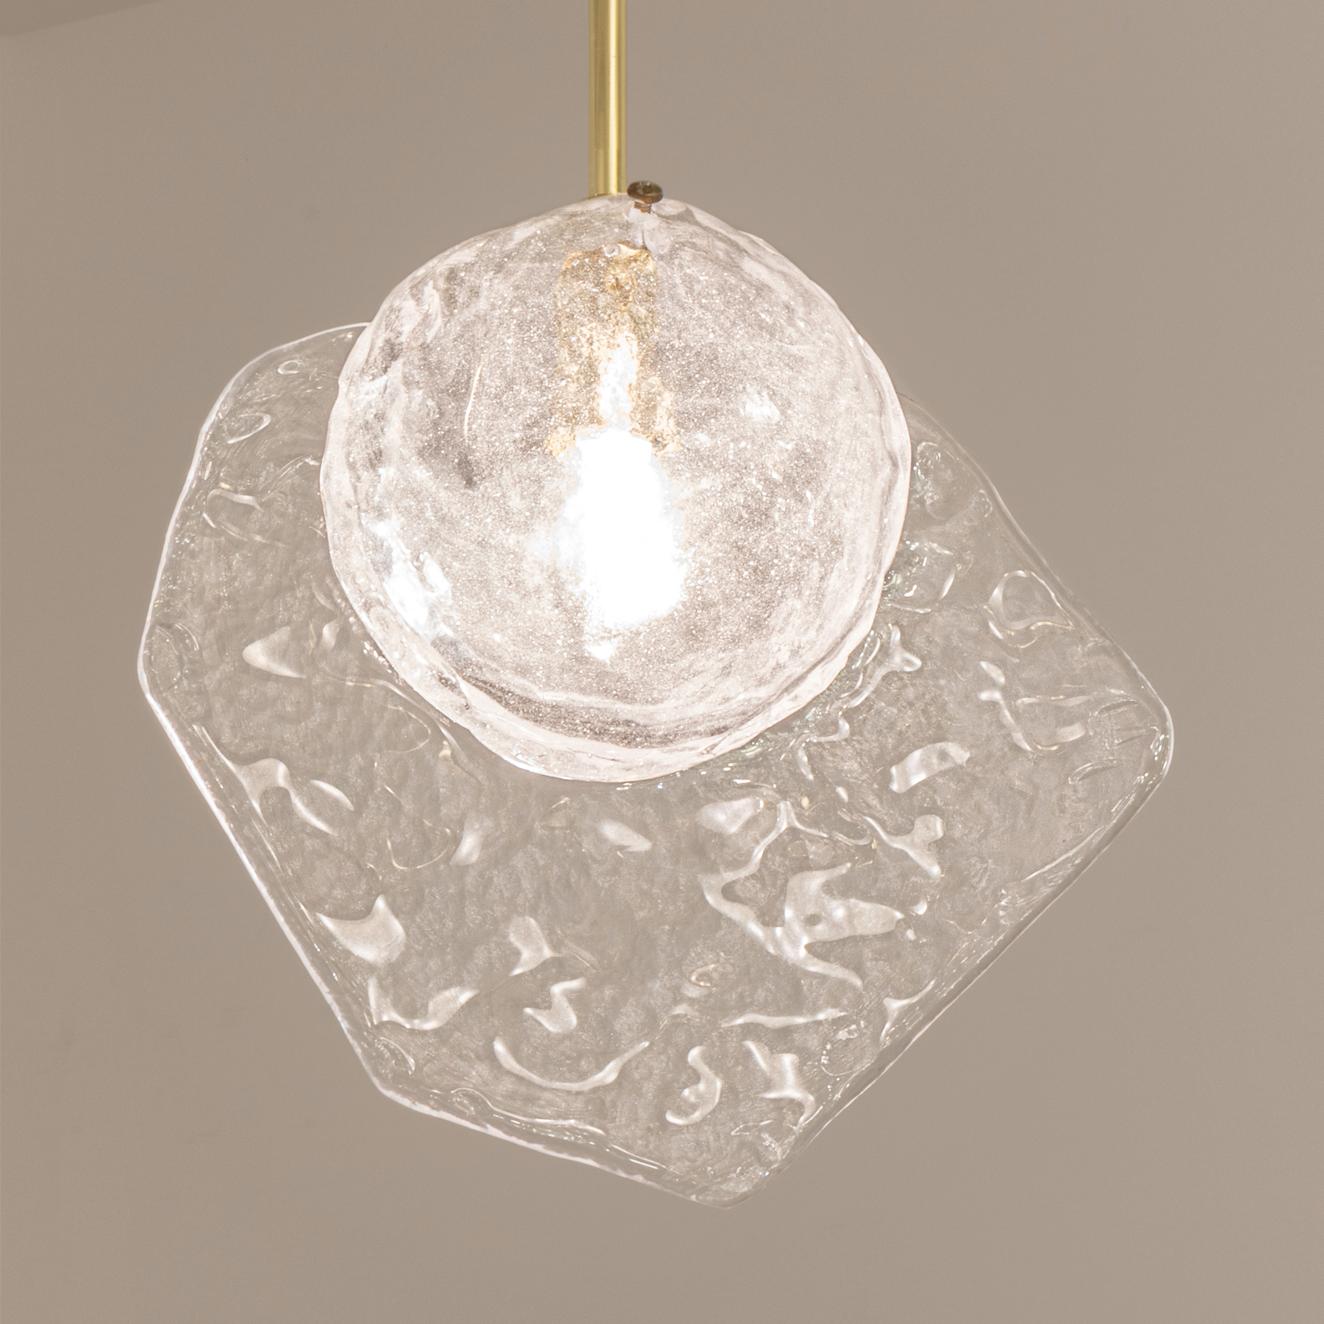 Inspired by the breeze of the venetian lagoon, the Brezza pendant by form A, is constructed from hand blown Murano glass with a bubble infused core and a textured fin. Shown on a polished brass stem.

Customization options:

Each fixture is